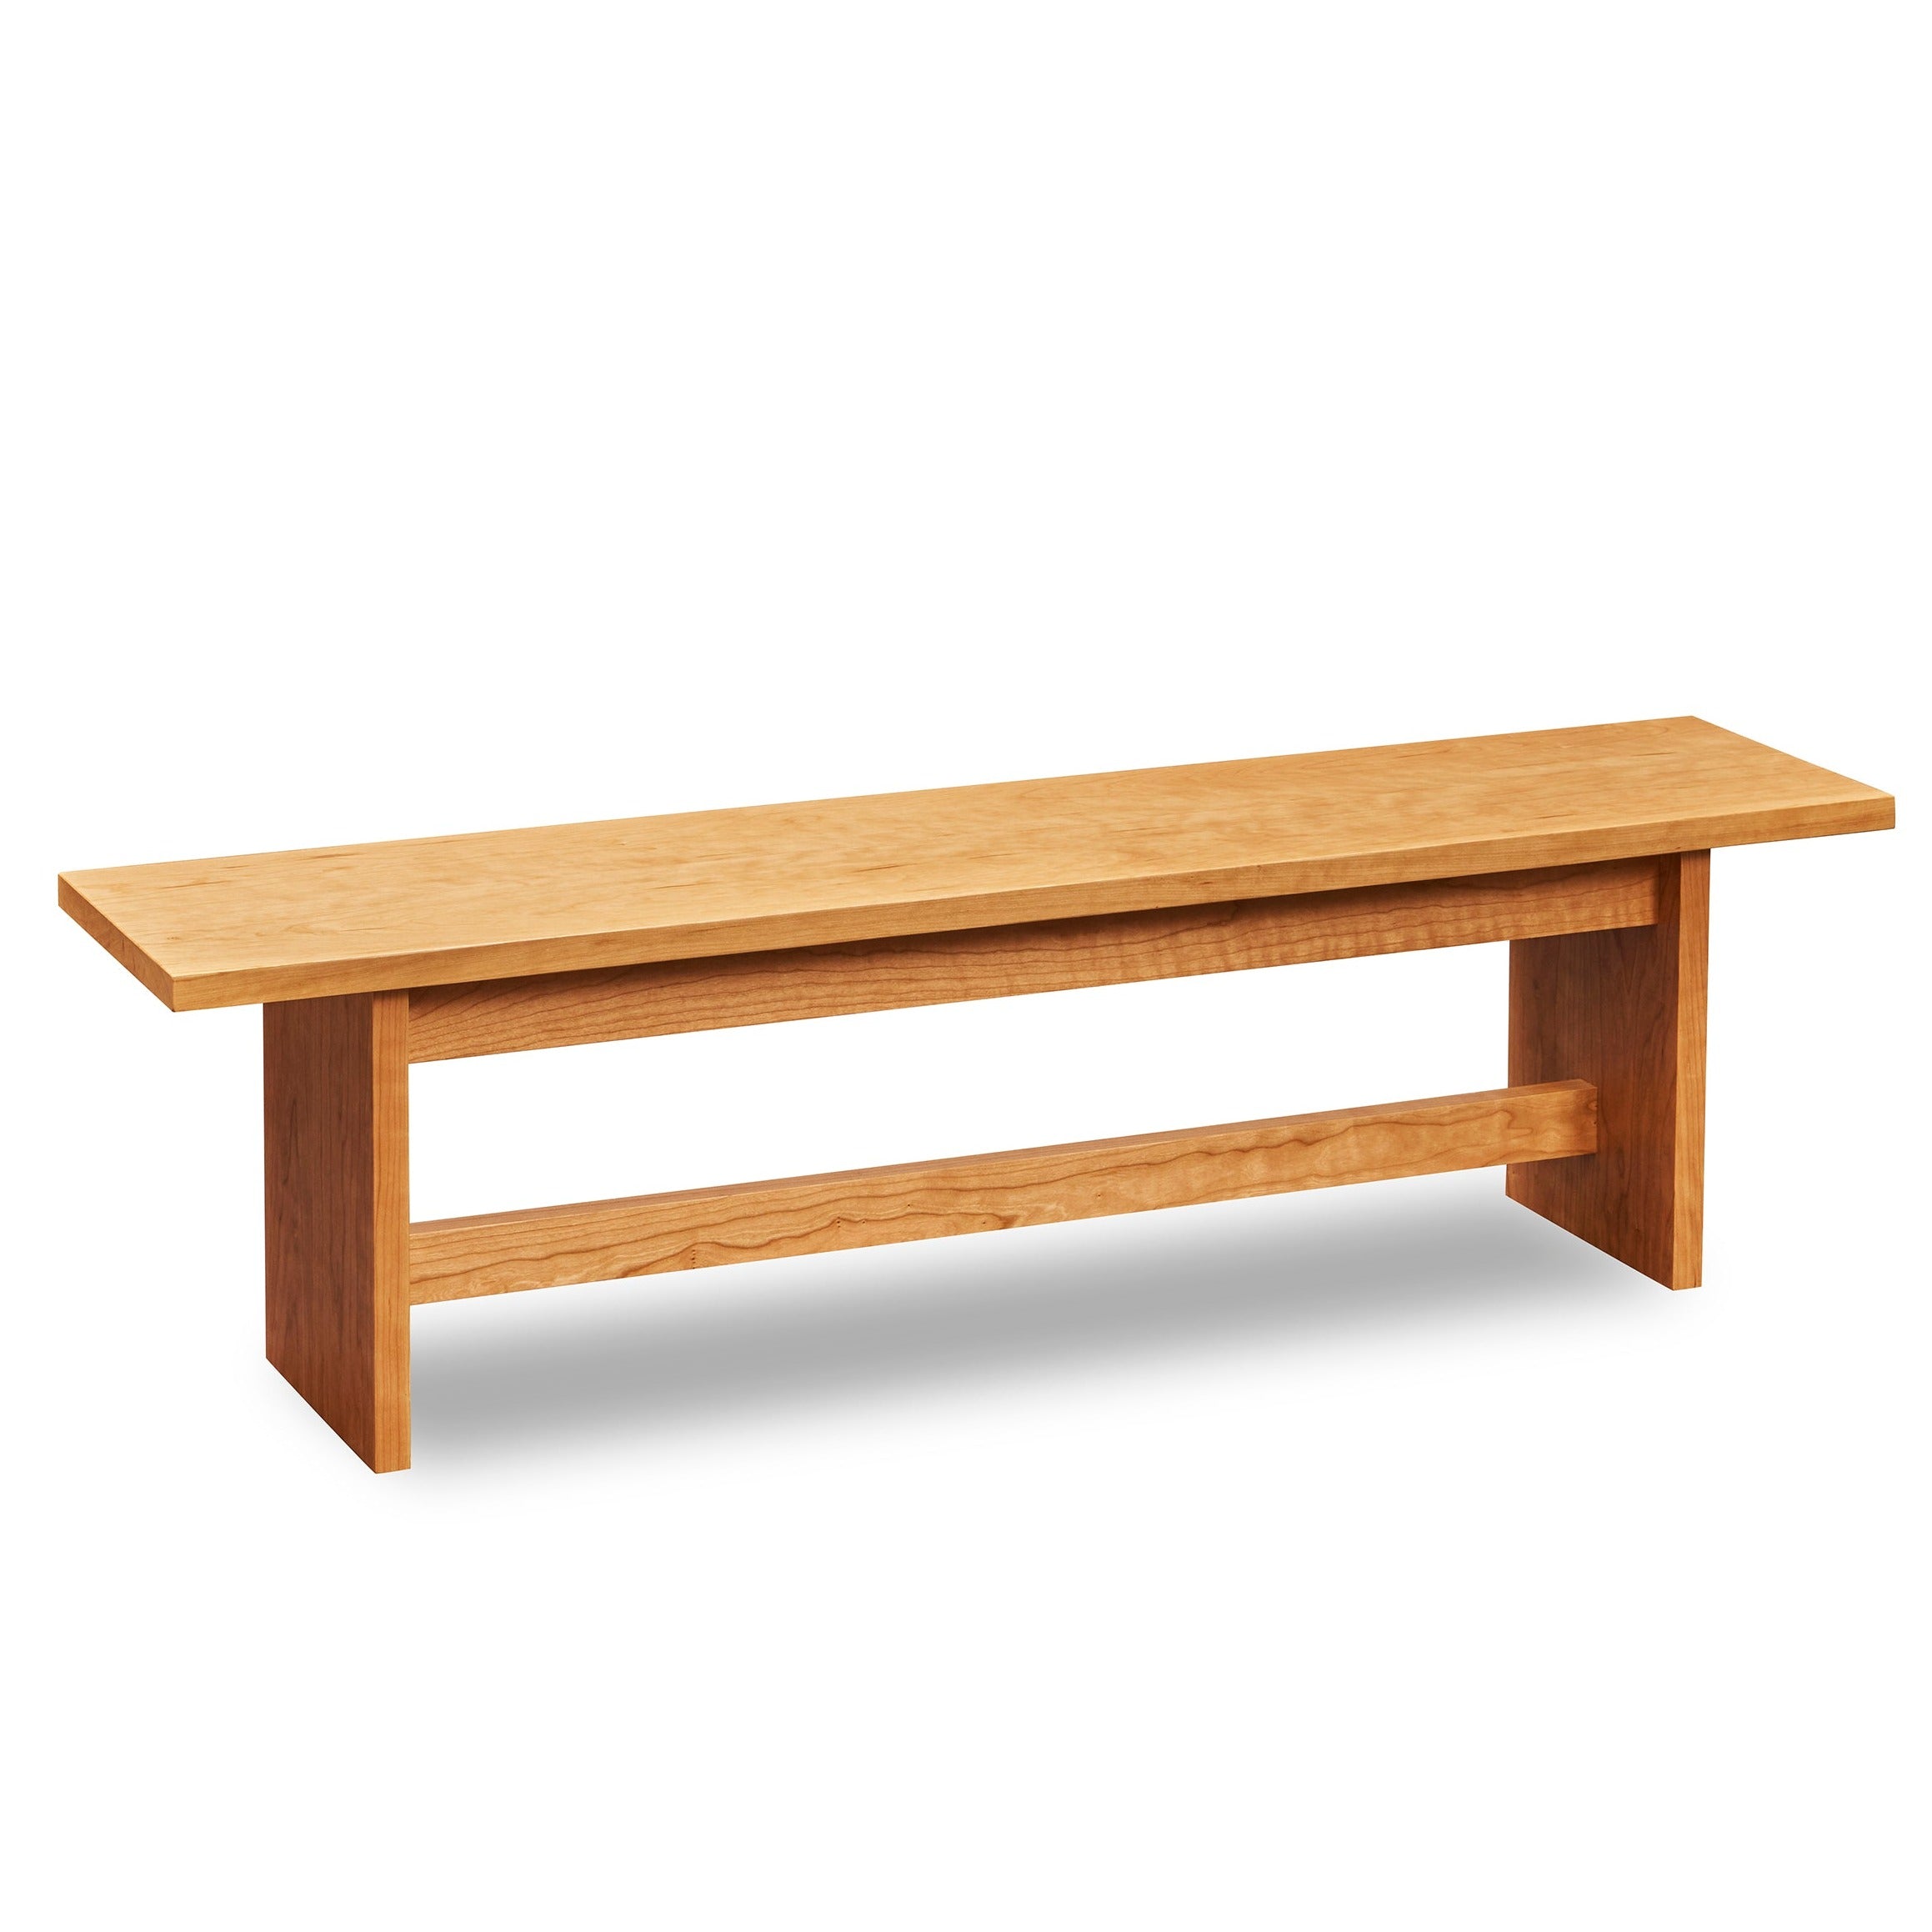 Bench with panel style trestle legs built in cherry wood.